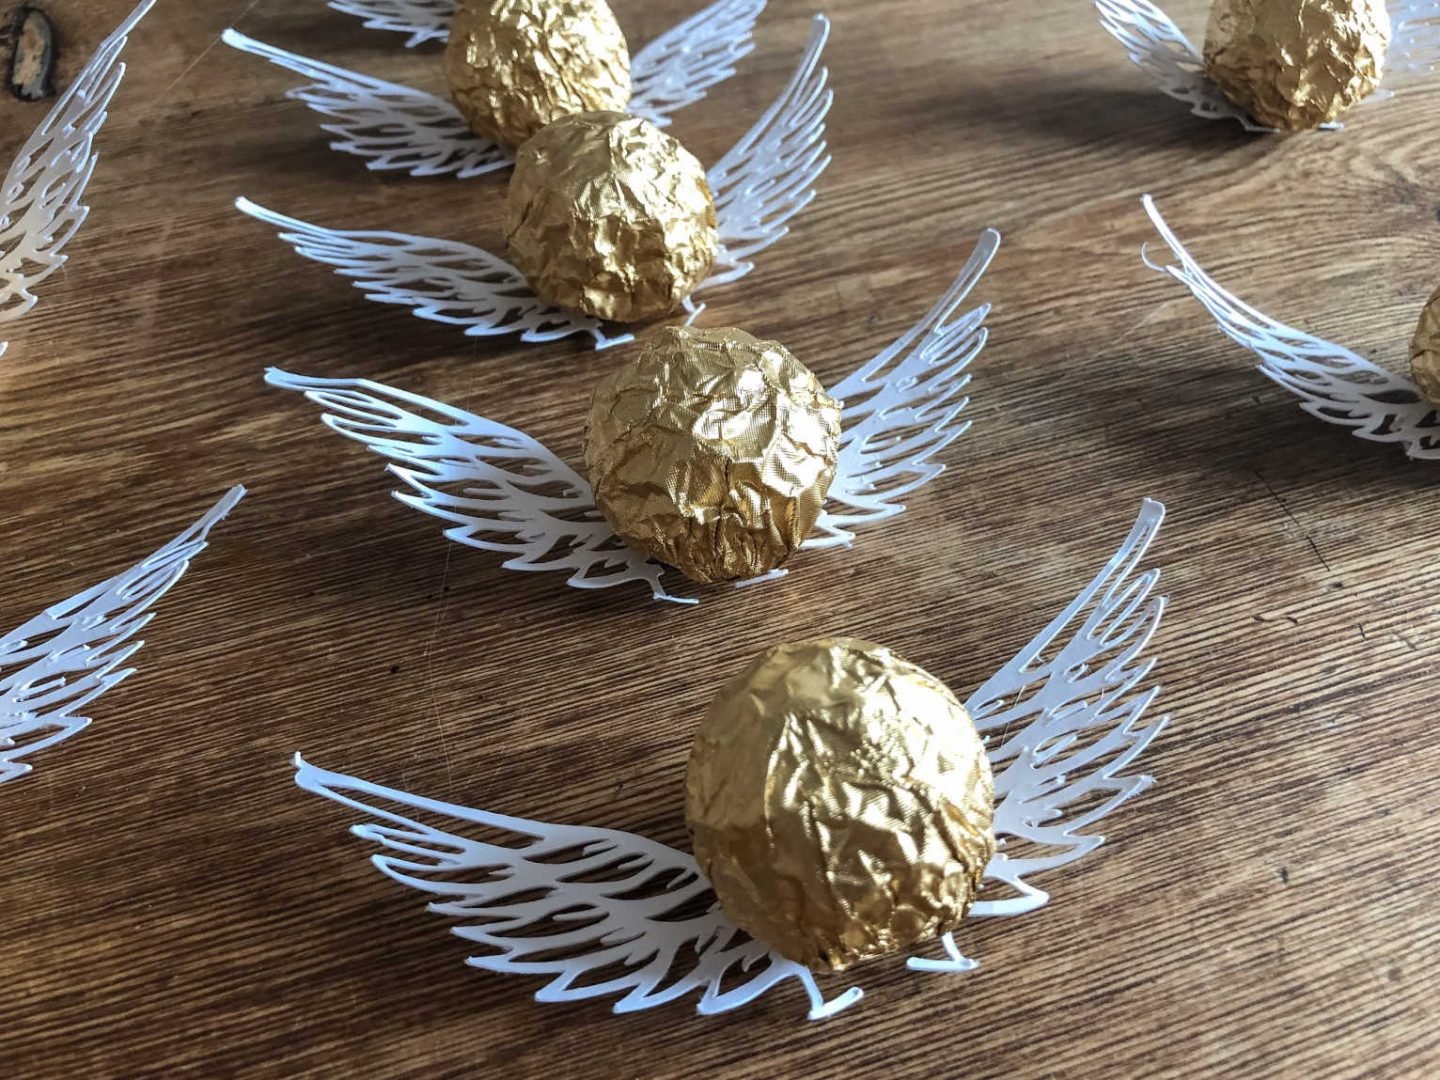 Golden snitch party chocolates and Cricut paper cutting art projects 